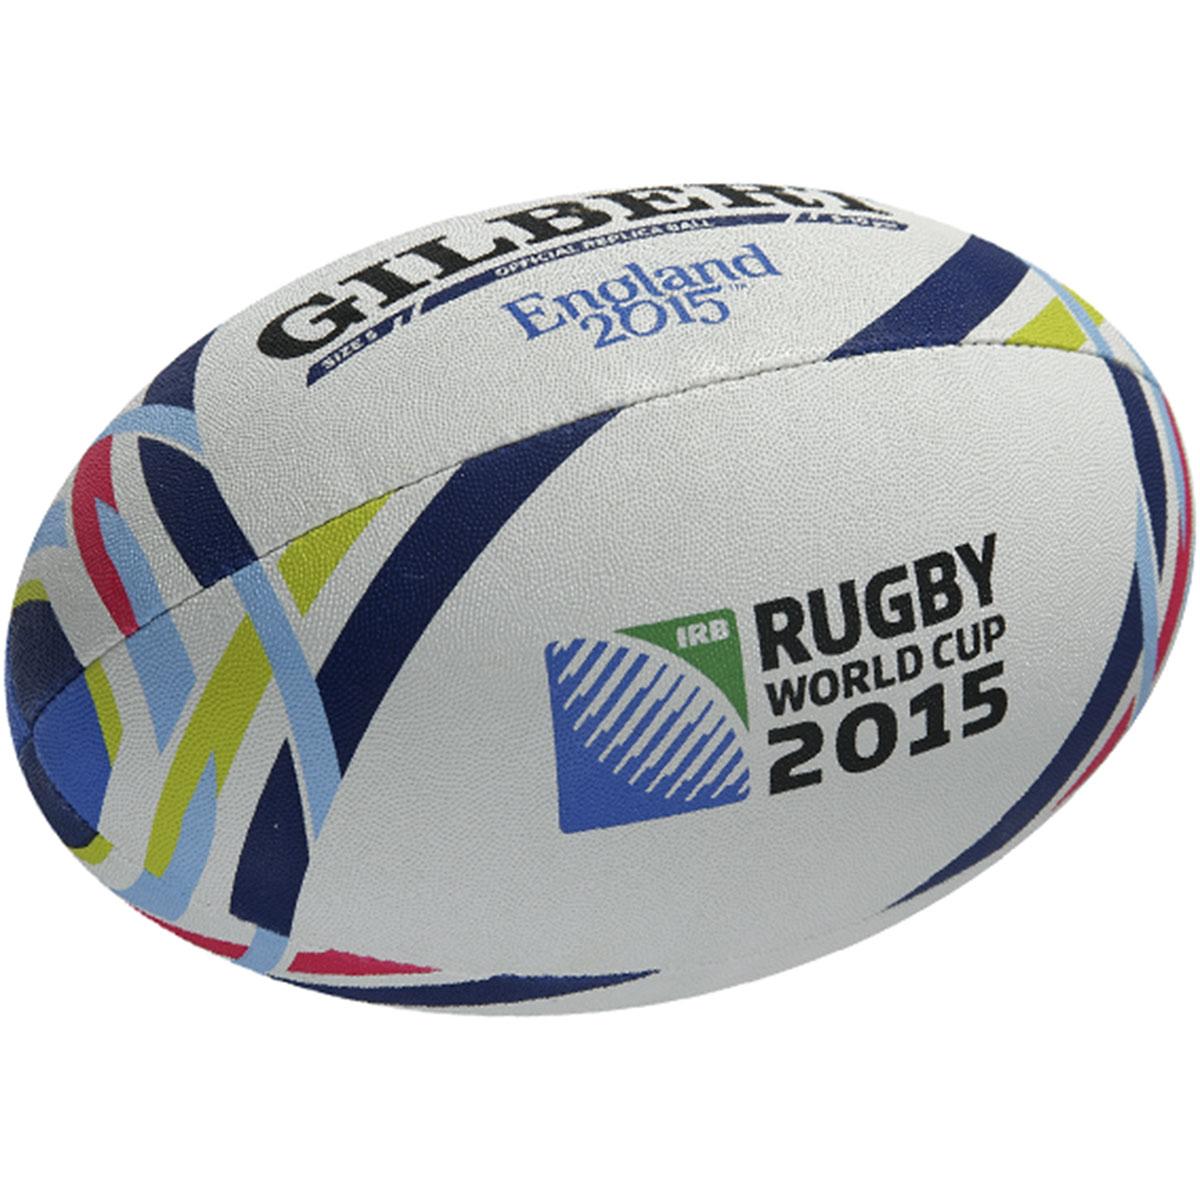 Amazing Rugby World Cup 2015 Pictures & Backgrounds